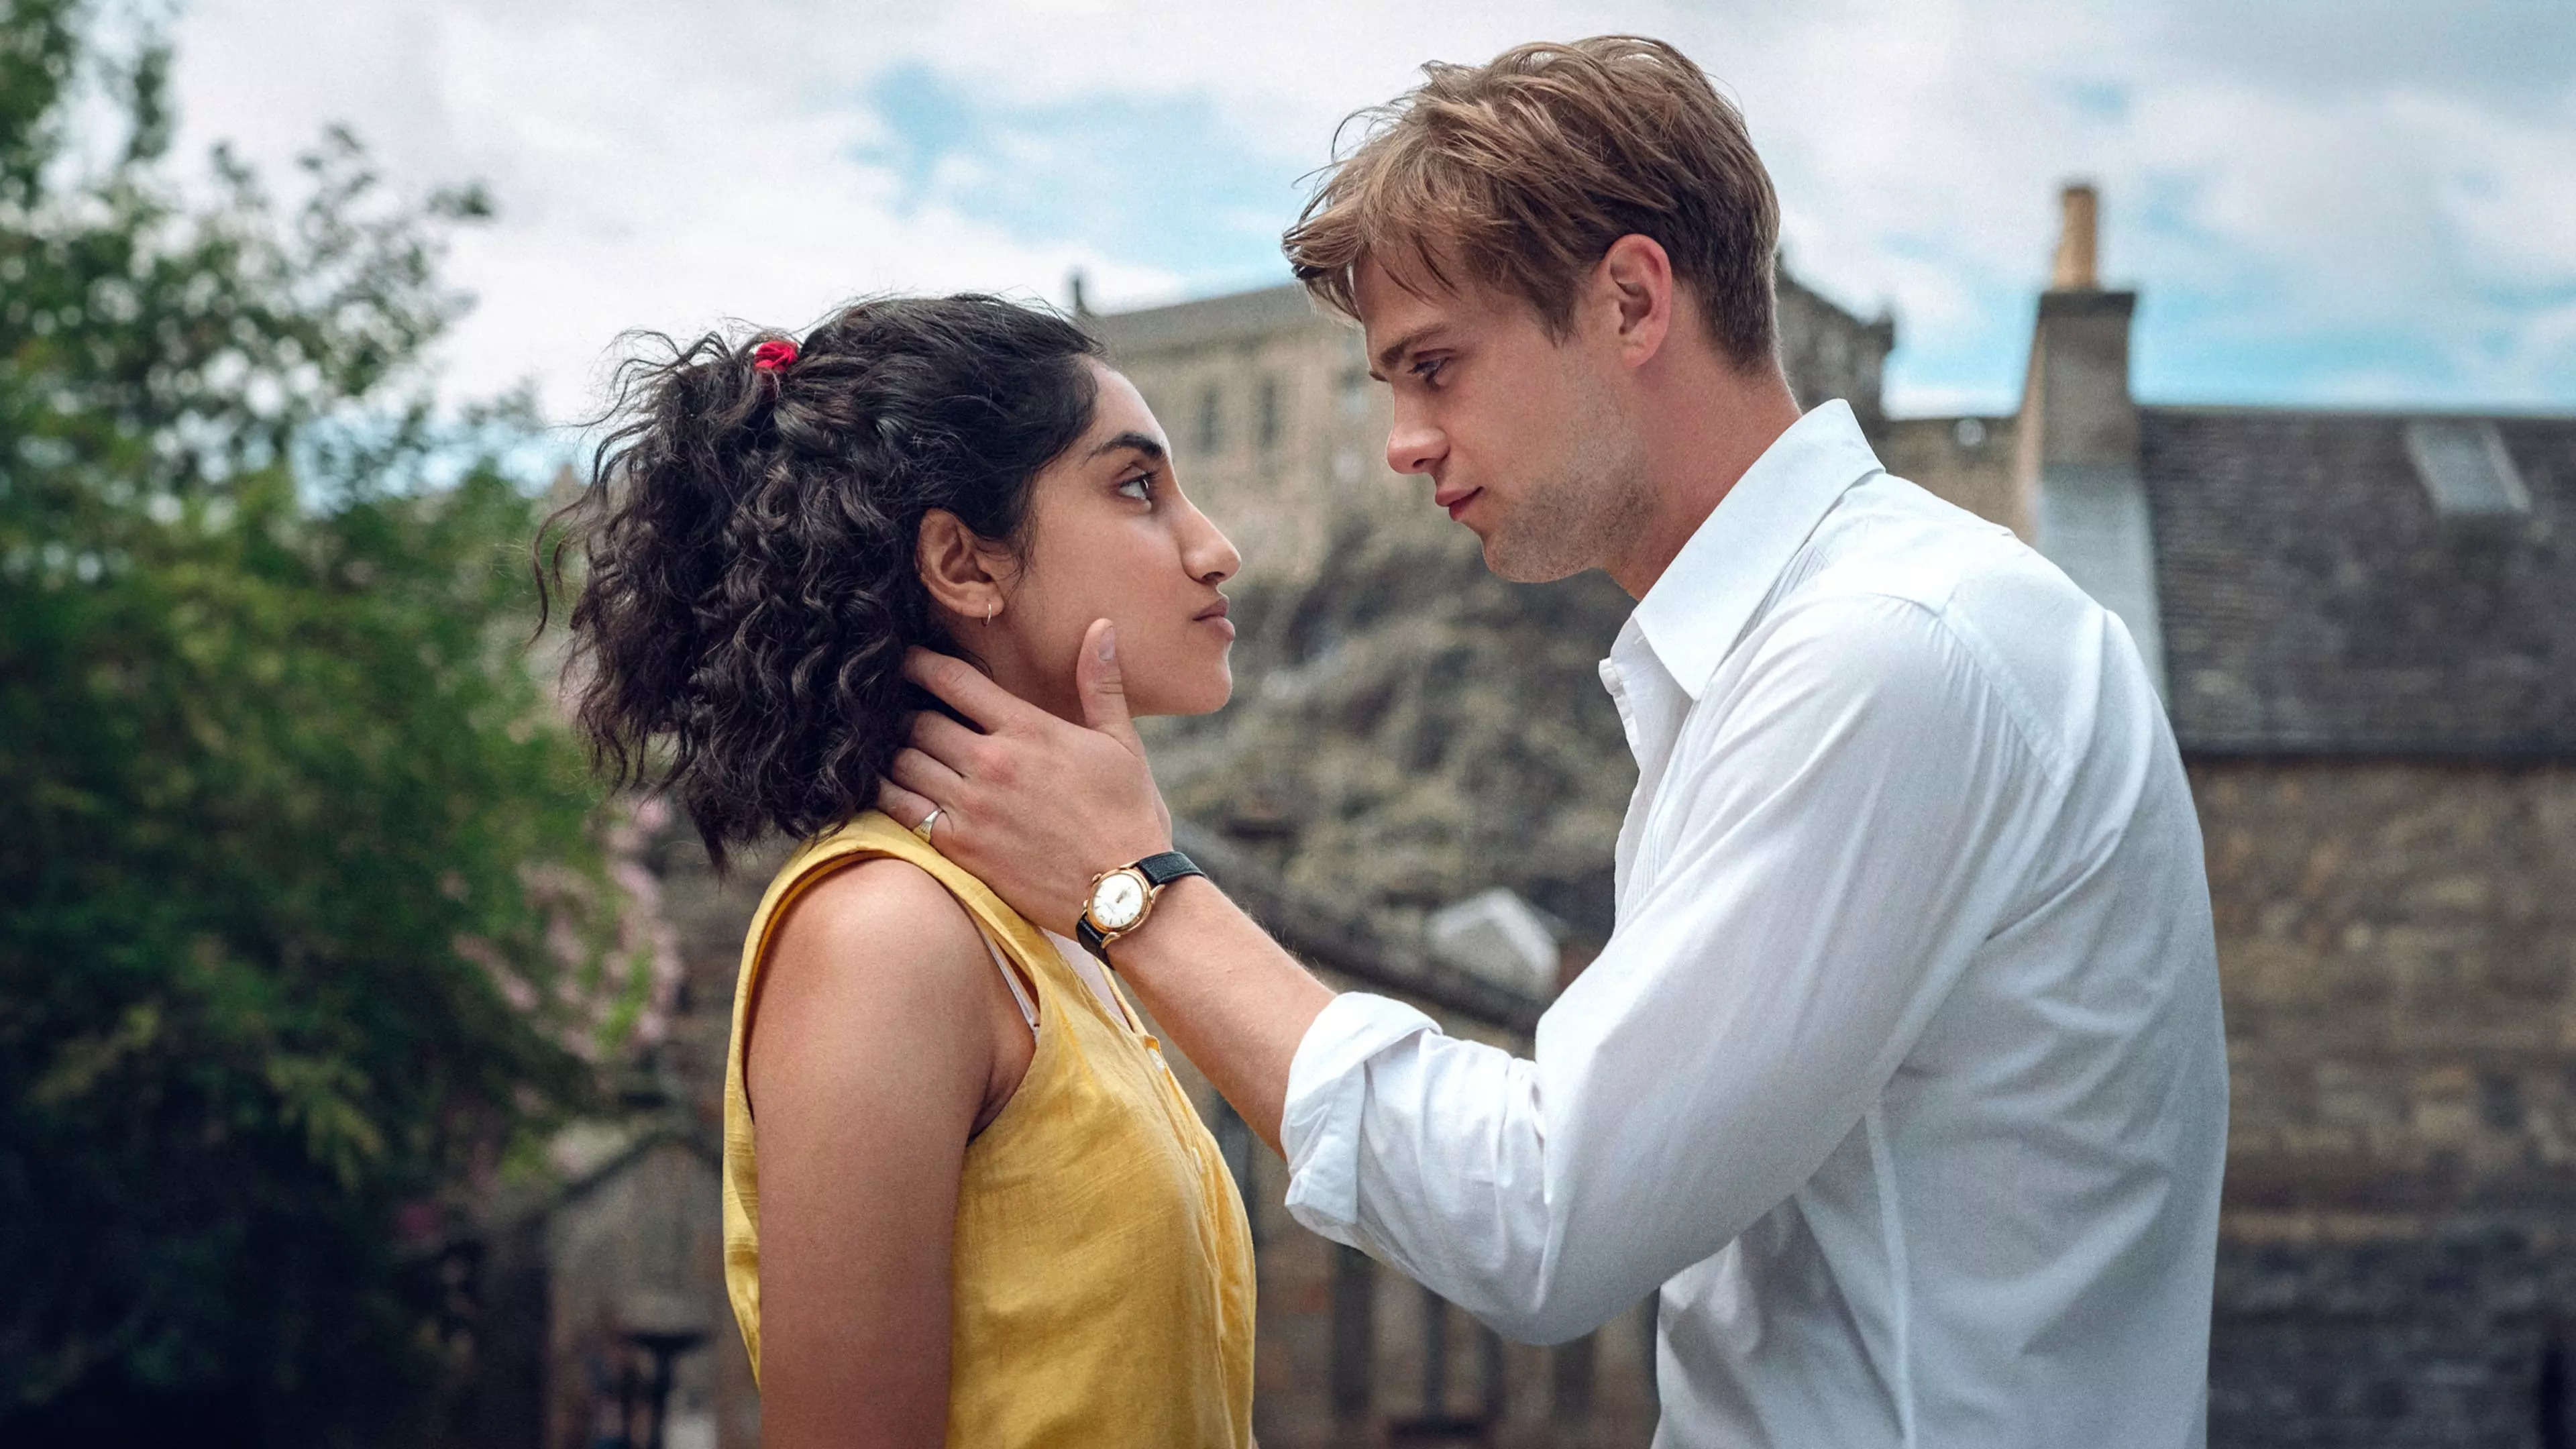 13 Shows Like One Day To Watch If You Loved Netflixs Latest Romance Series Businessinsider 0709